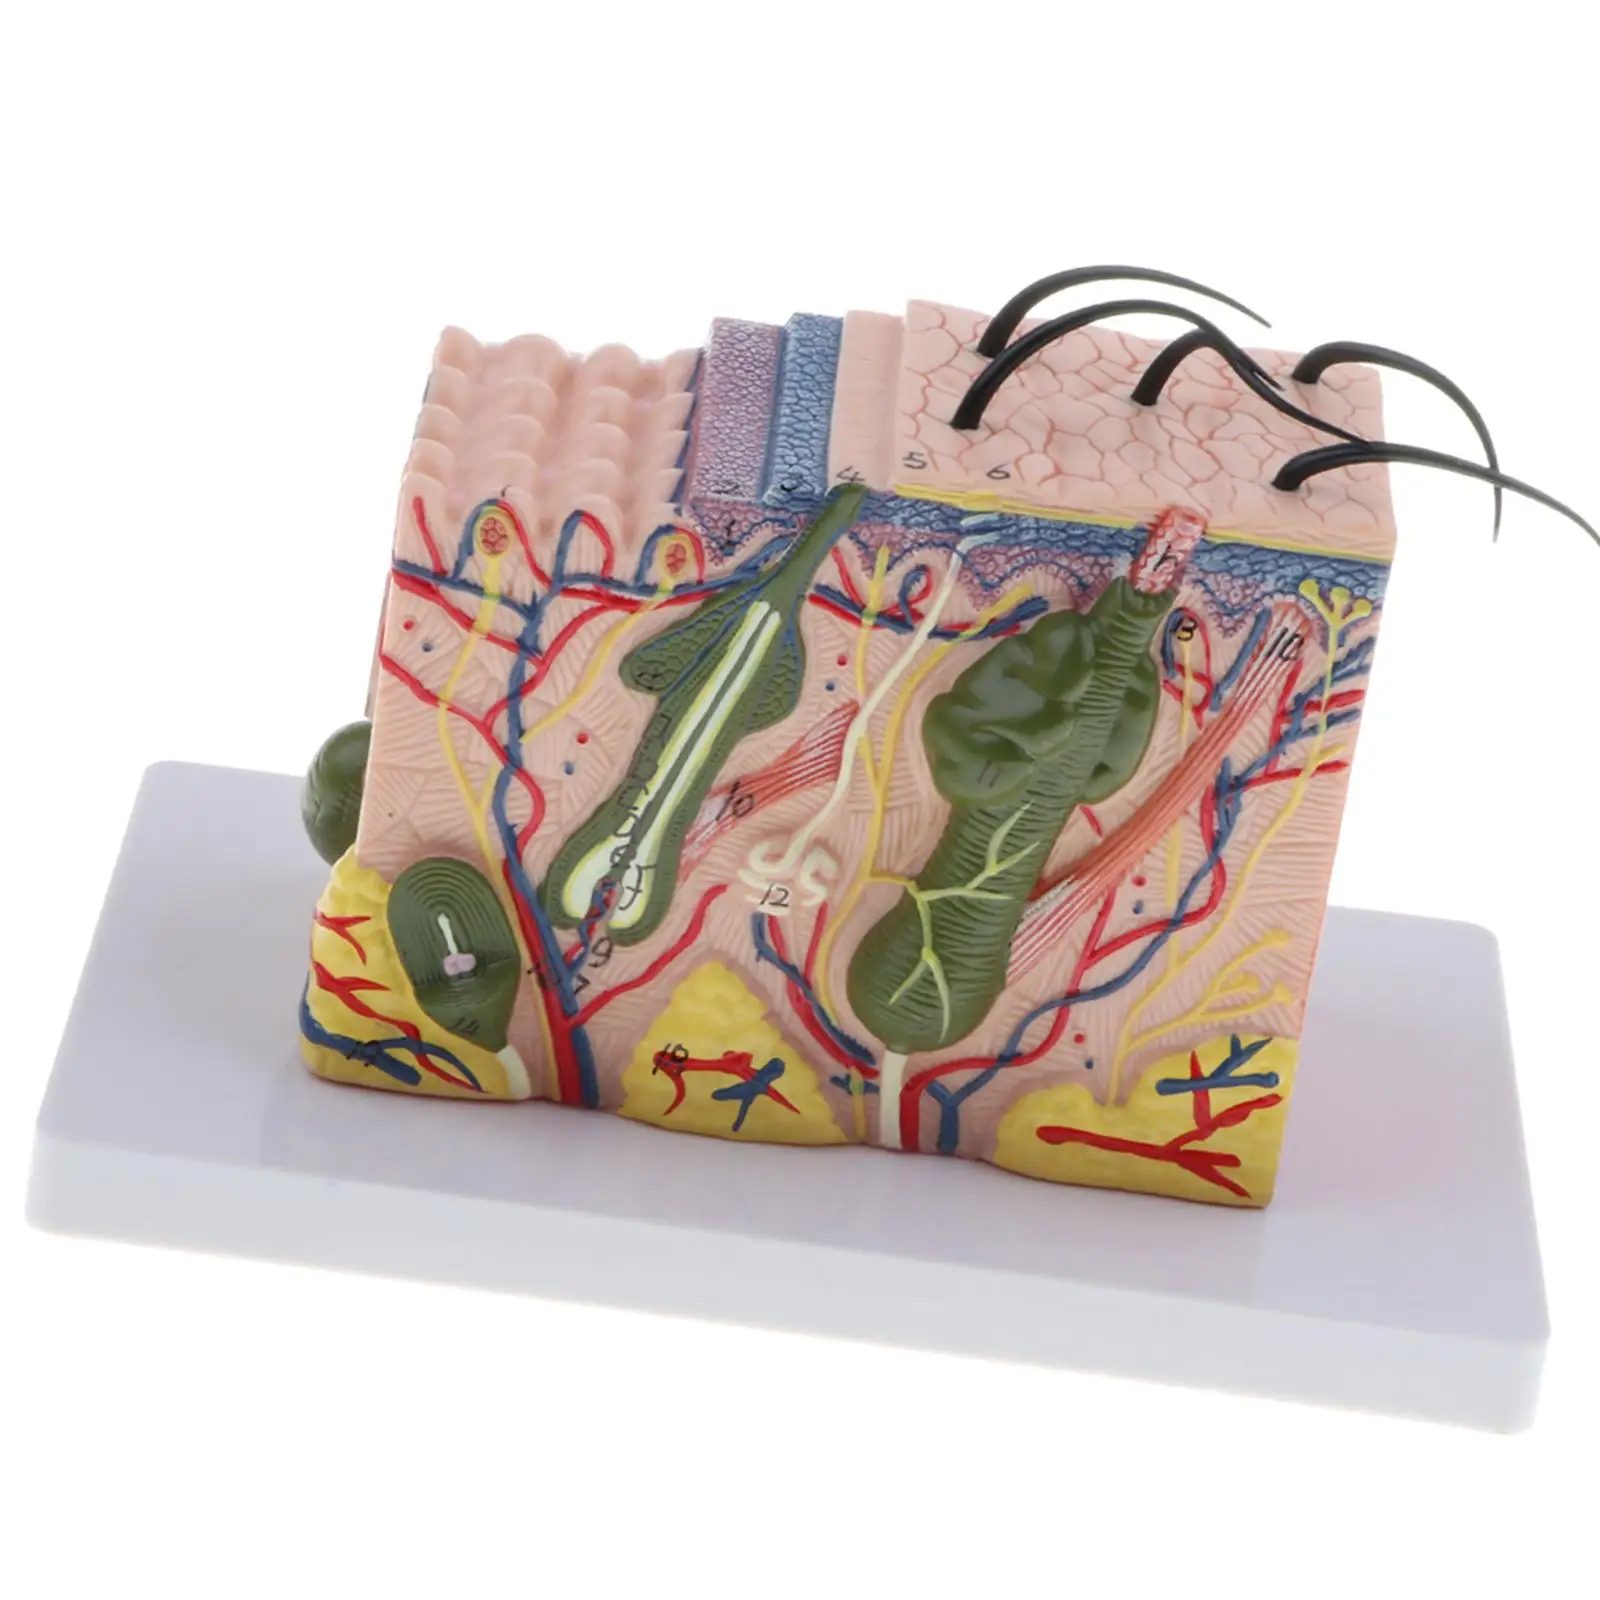 Magnify 35X Human Skin Texture Subcutaneous Tissue Dissection Model Biology Teaching Display